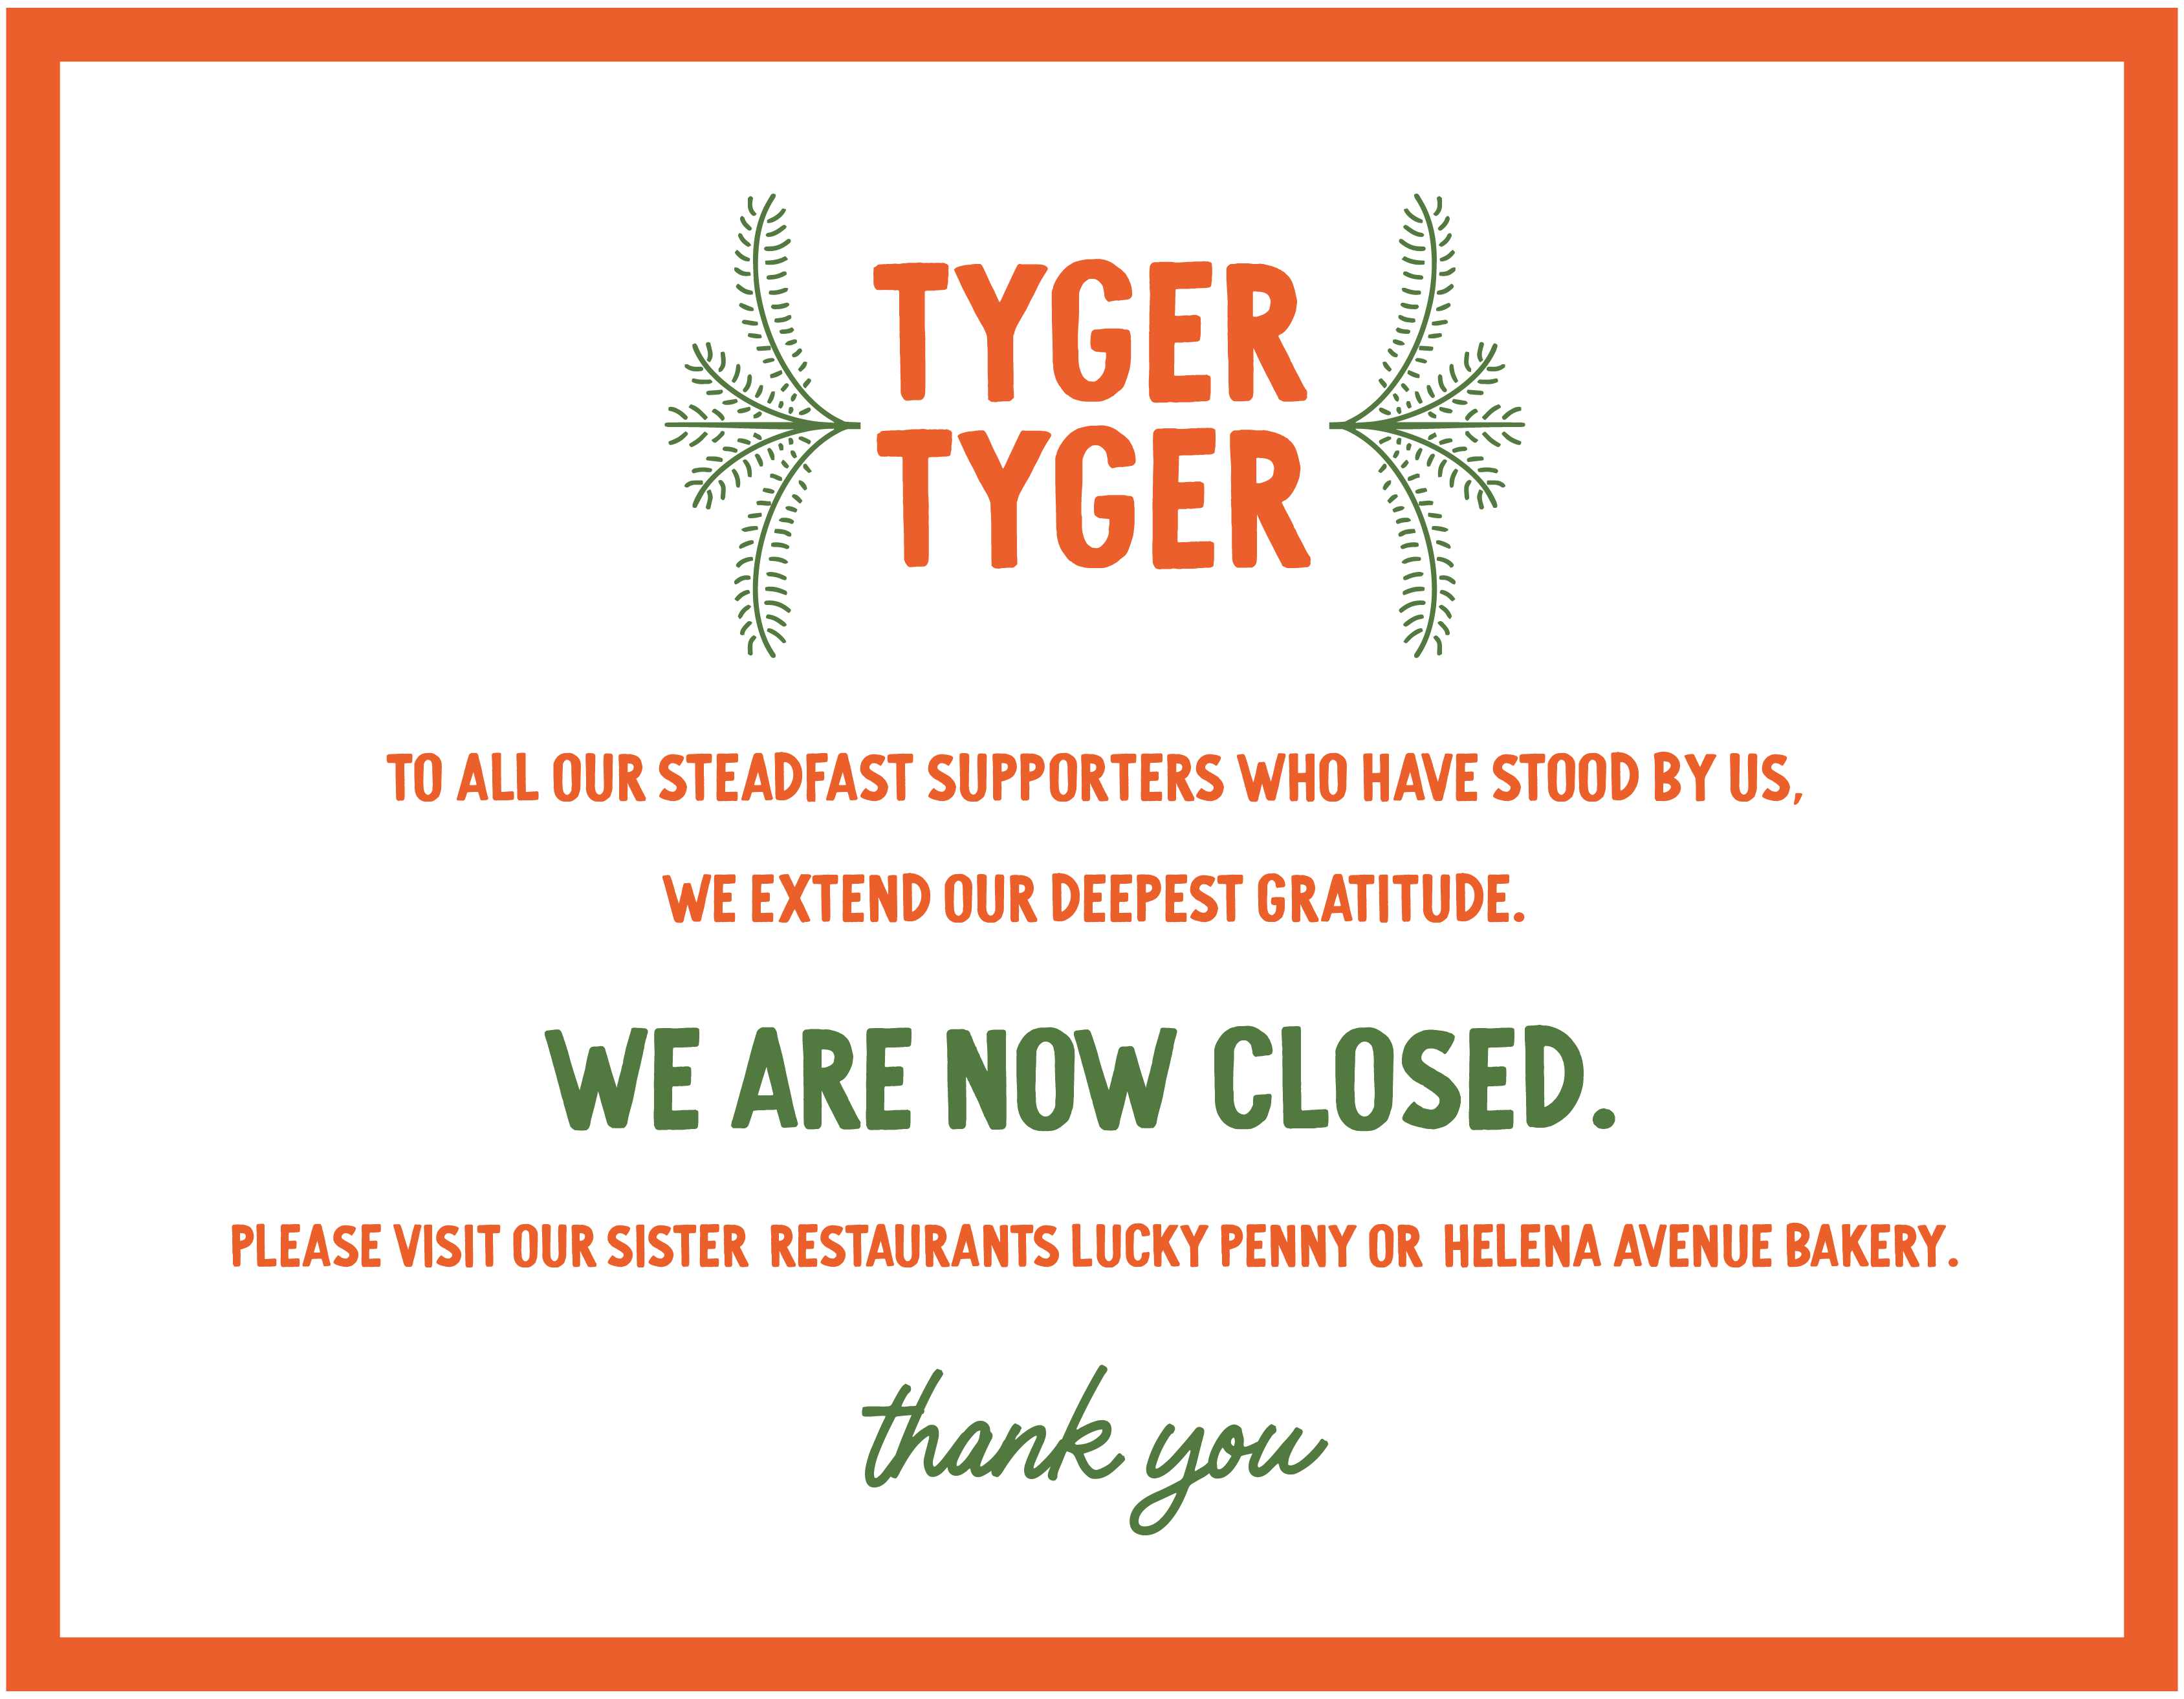 To all our steadfast supporters who have stood by us, we extend our deepest gratitude. We are now closed. Please visit our sister restaurants Lucky Penny or Helena Avenue Bakery. Thank you, Tyger Tyger